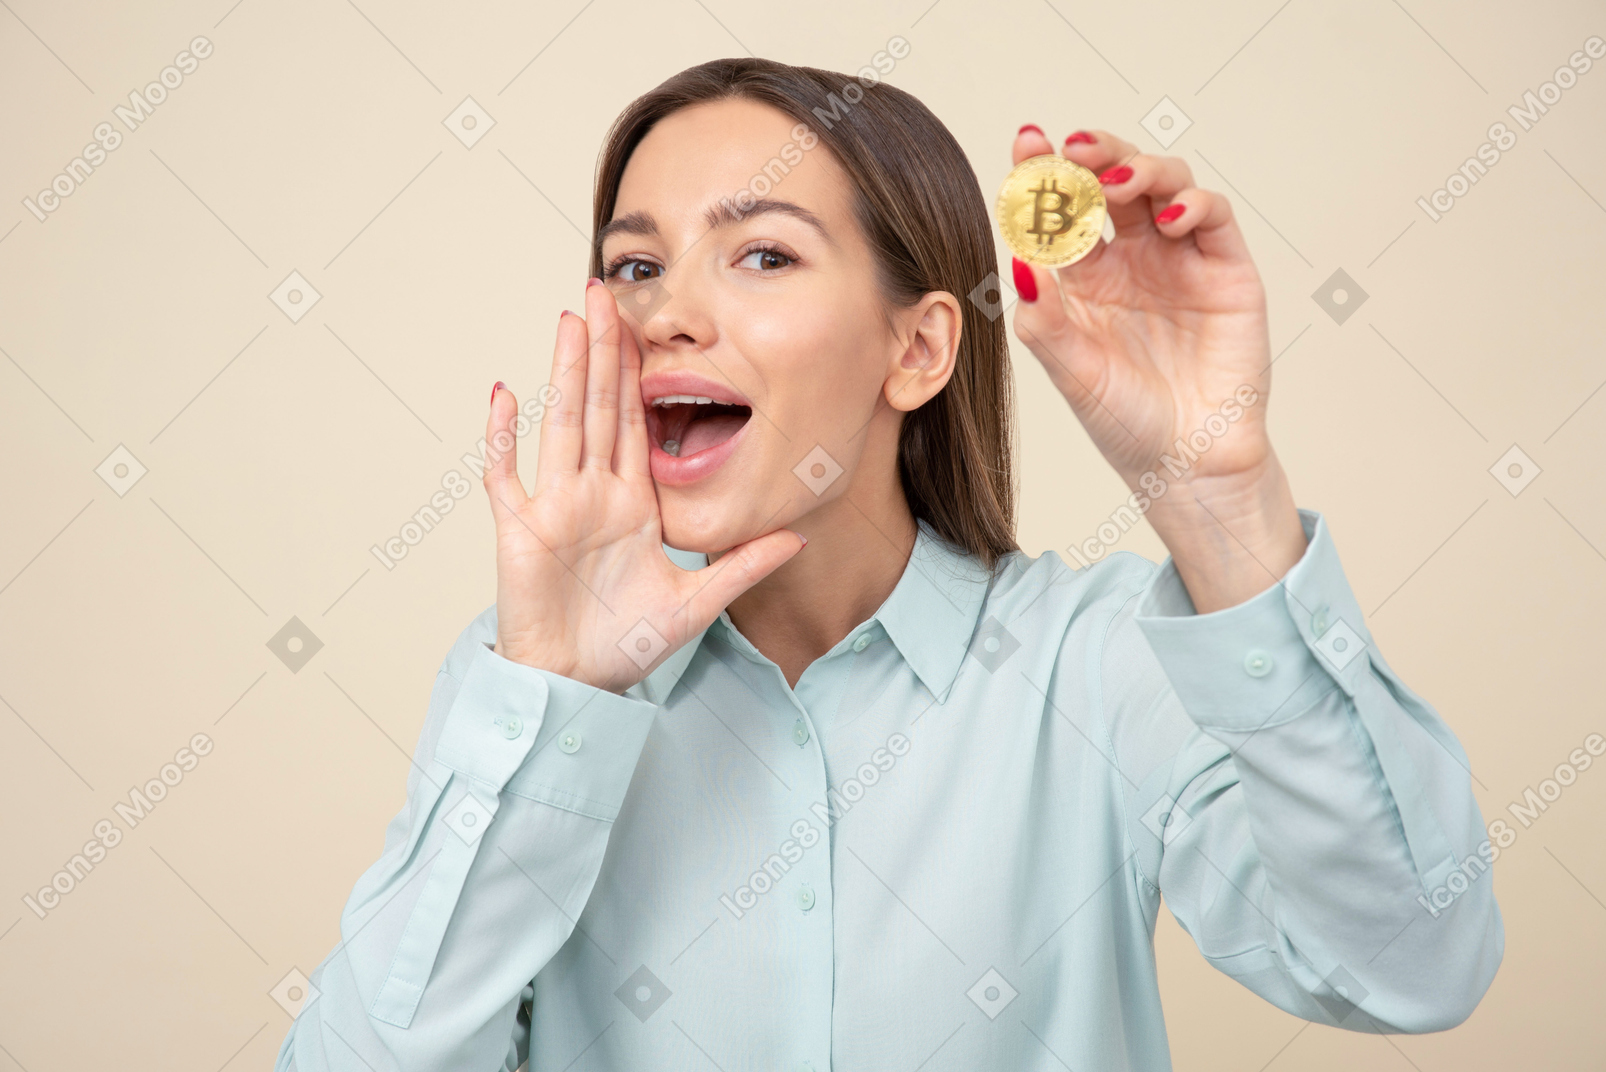 Attractive young girl holding bitcoin and screaming something